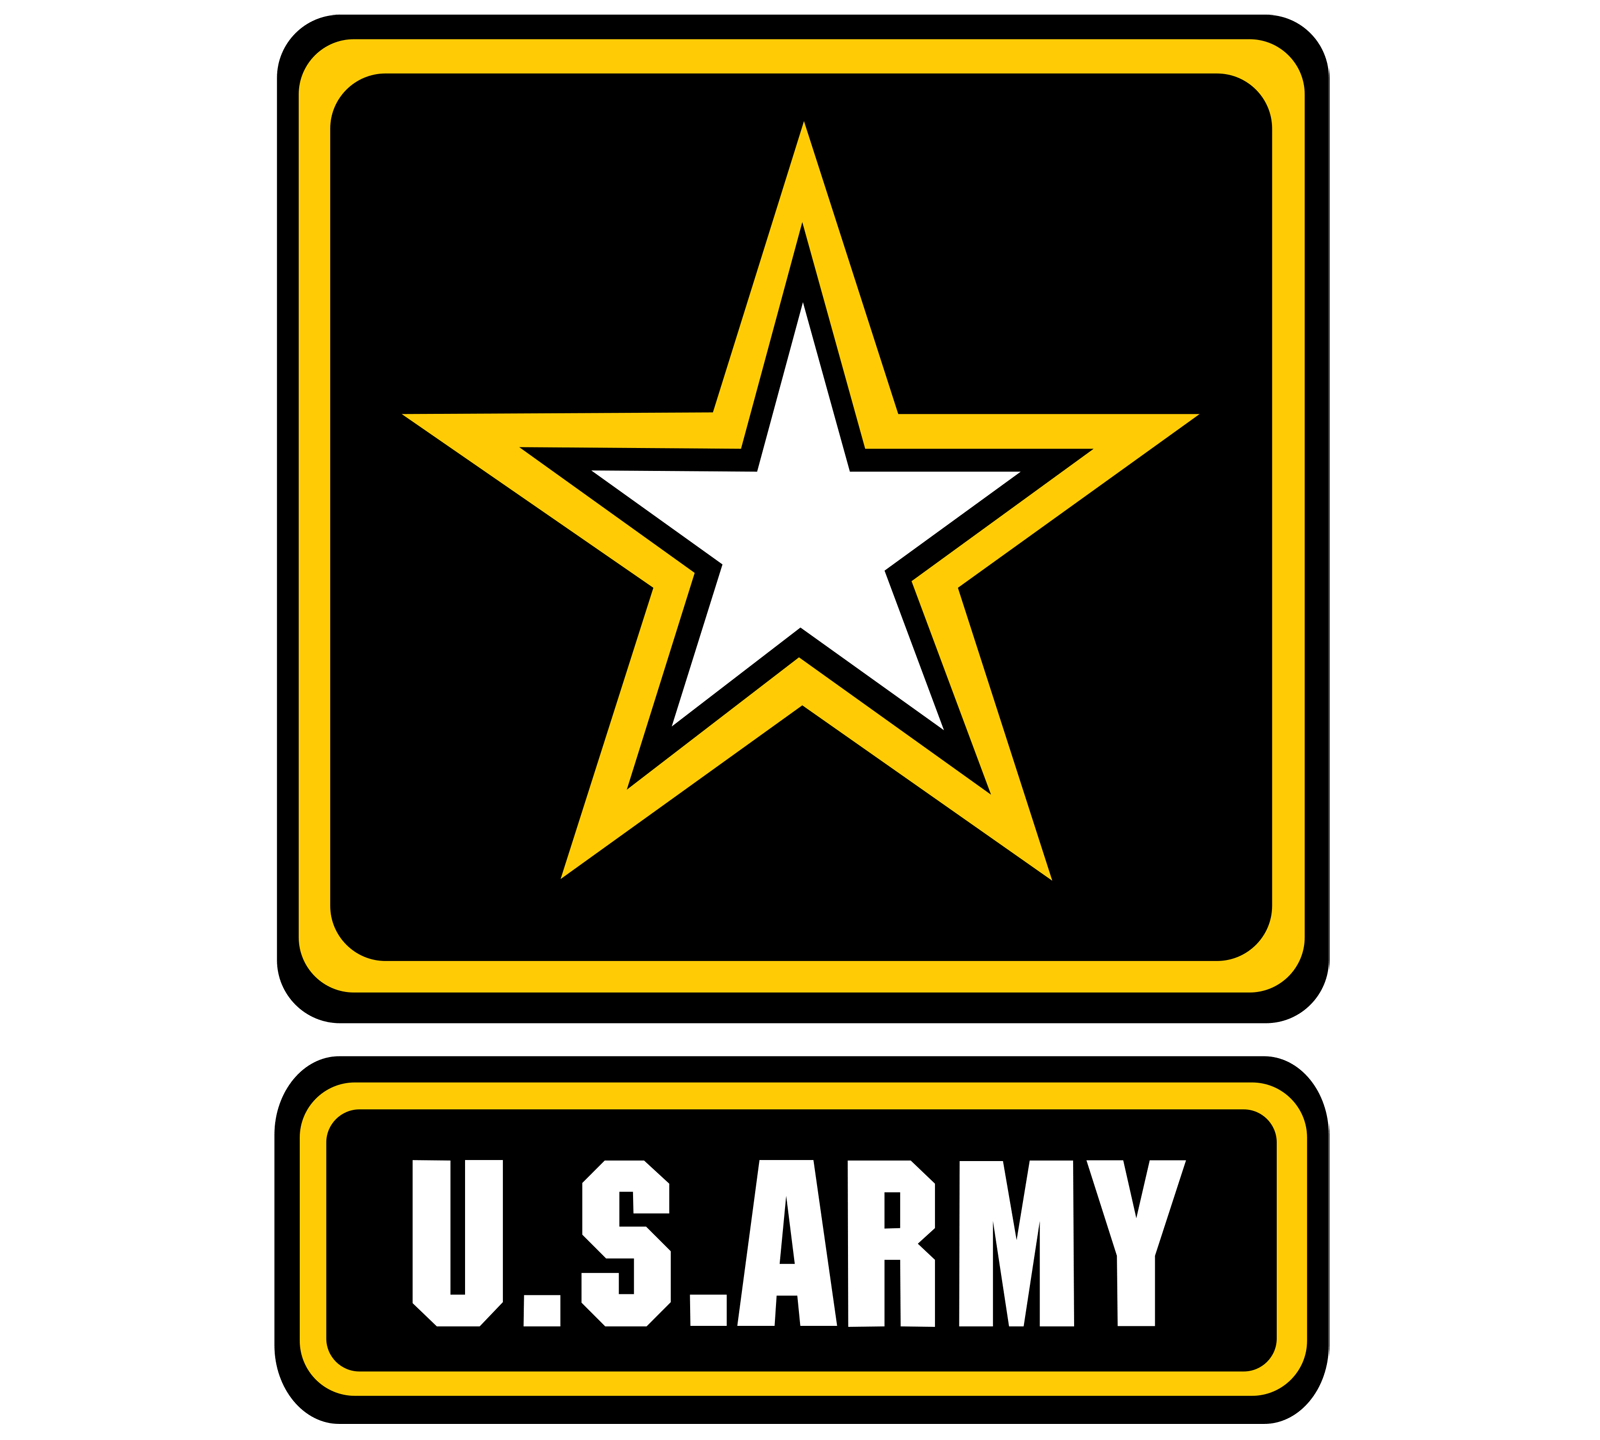 The Department Logo - U.S. Army Logo, U.S. Army Symbol, Meaning, History and Evolution